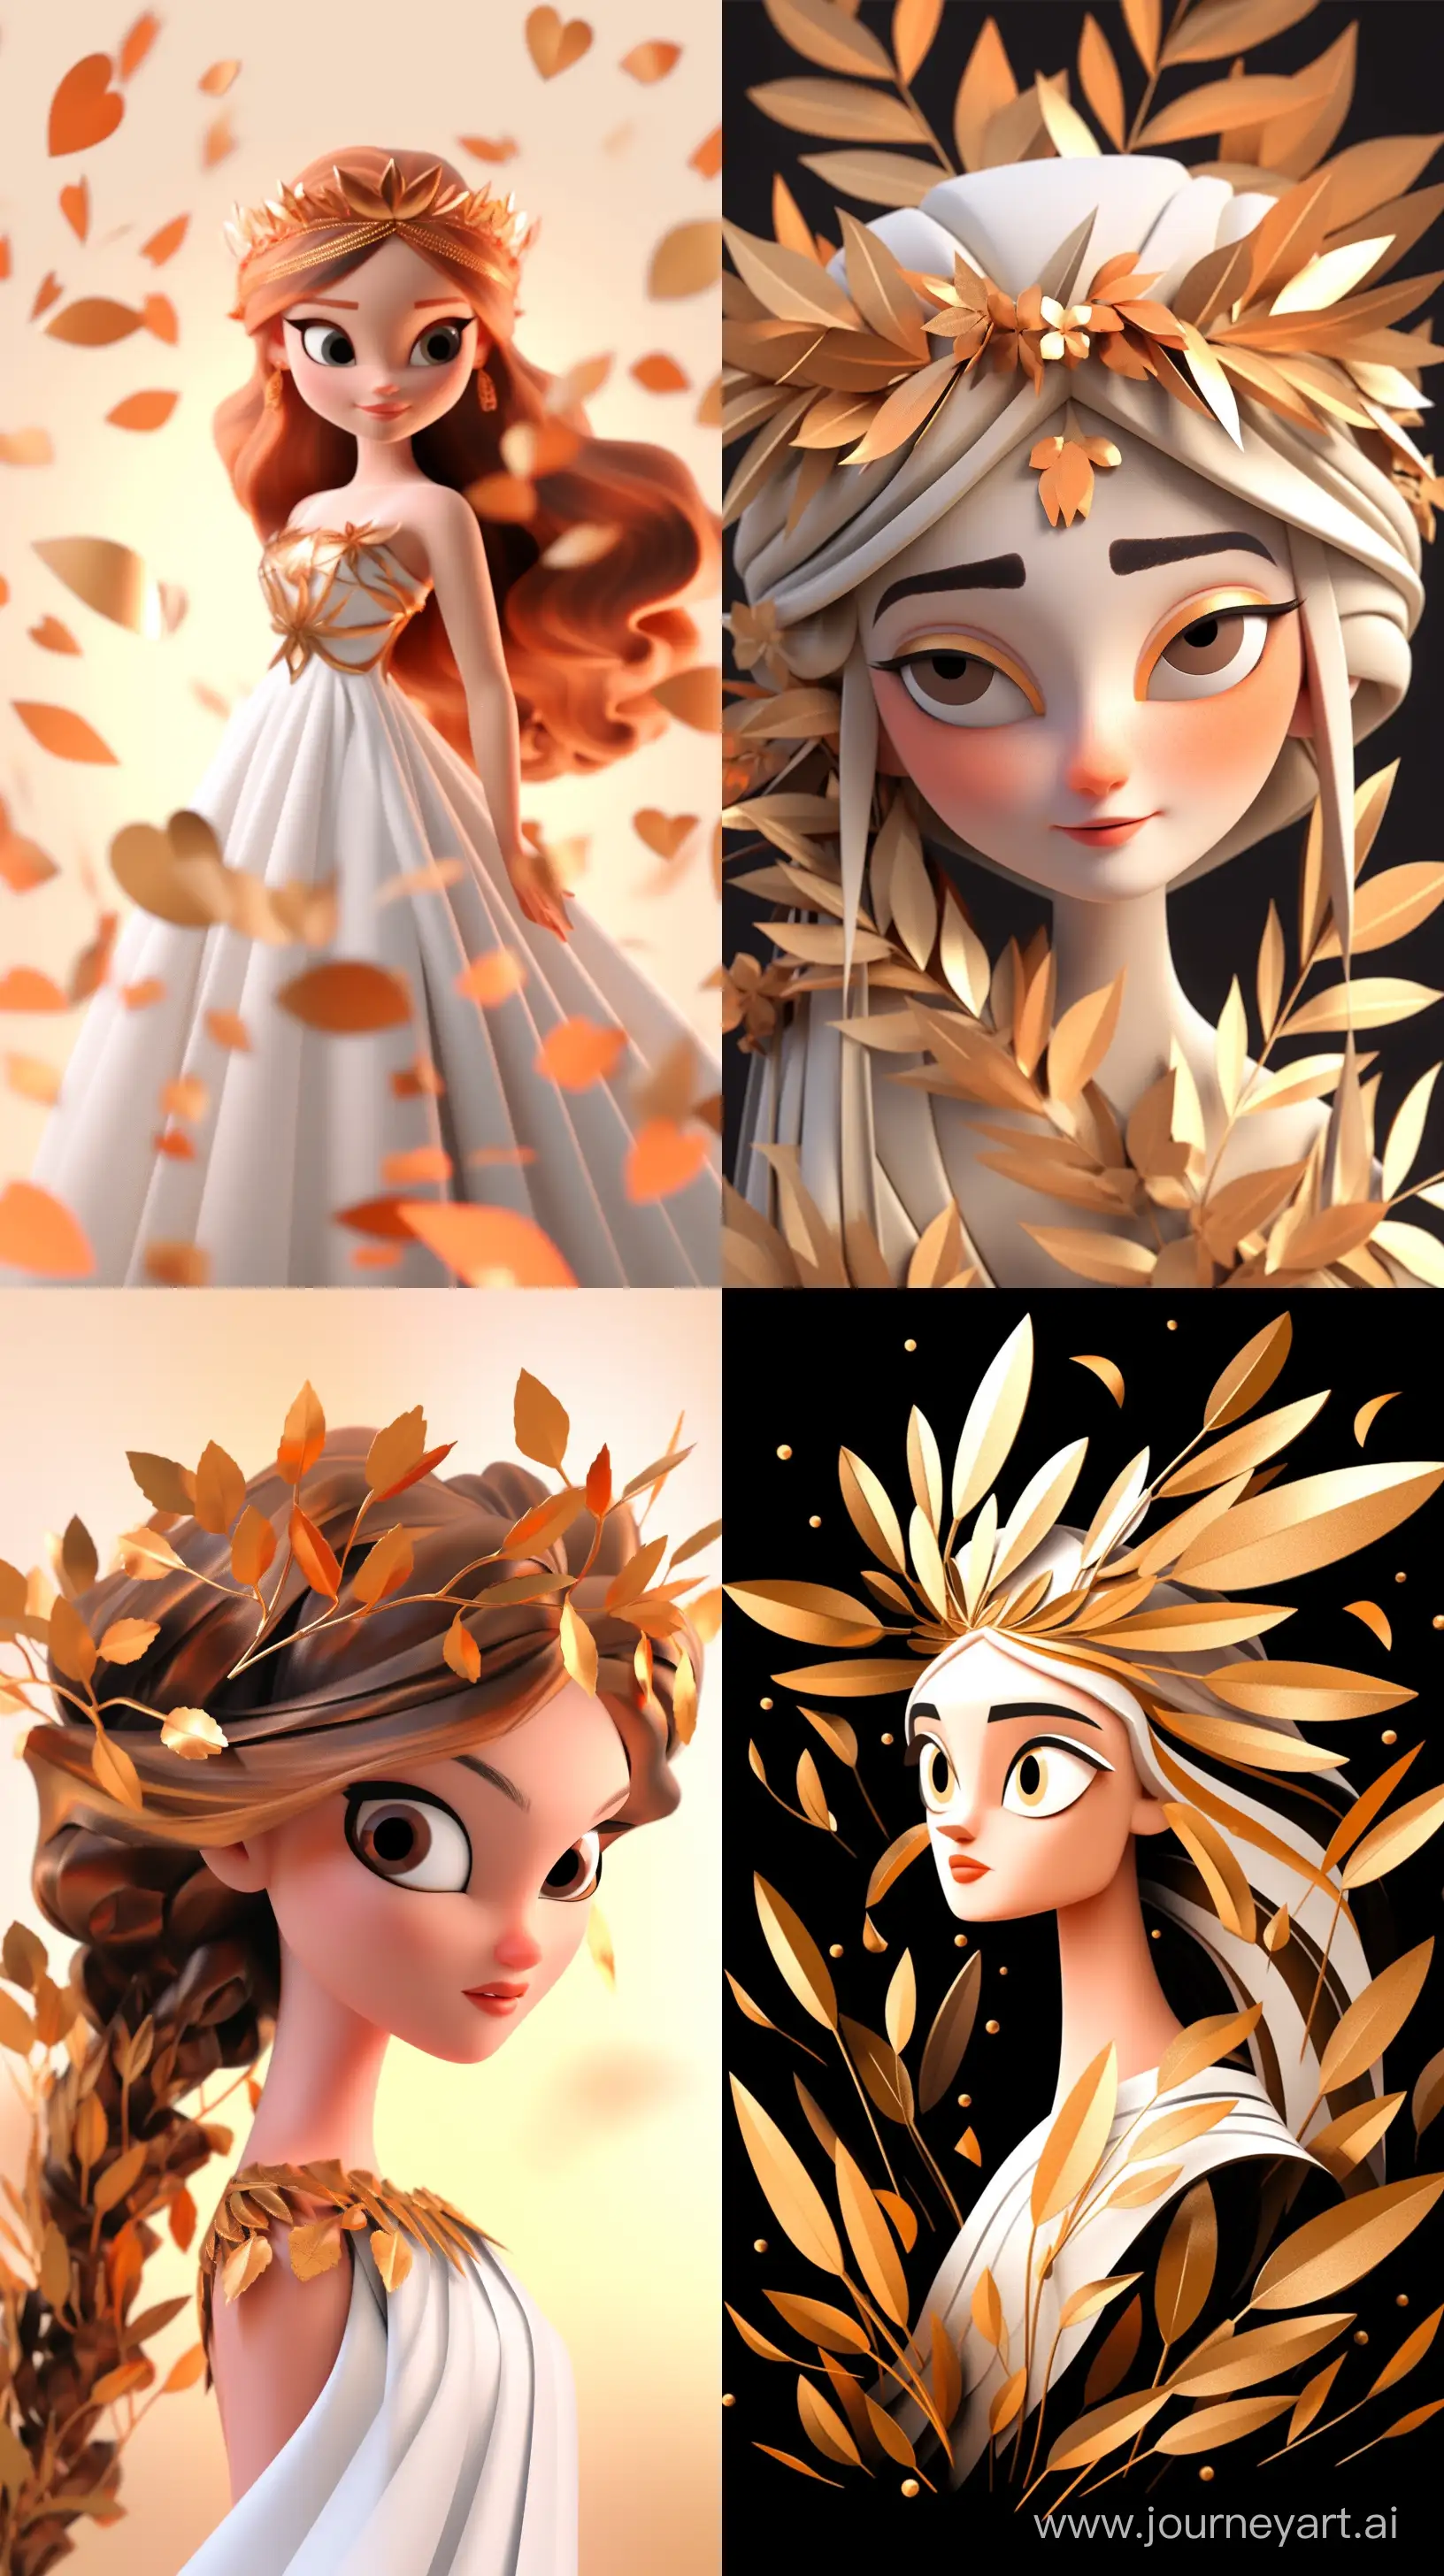 Enchanting-Greek-Goddess-Embraces-Nature-in-Stunning-Monochrome-and-Gold-Animation